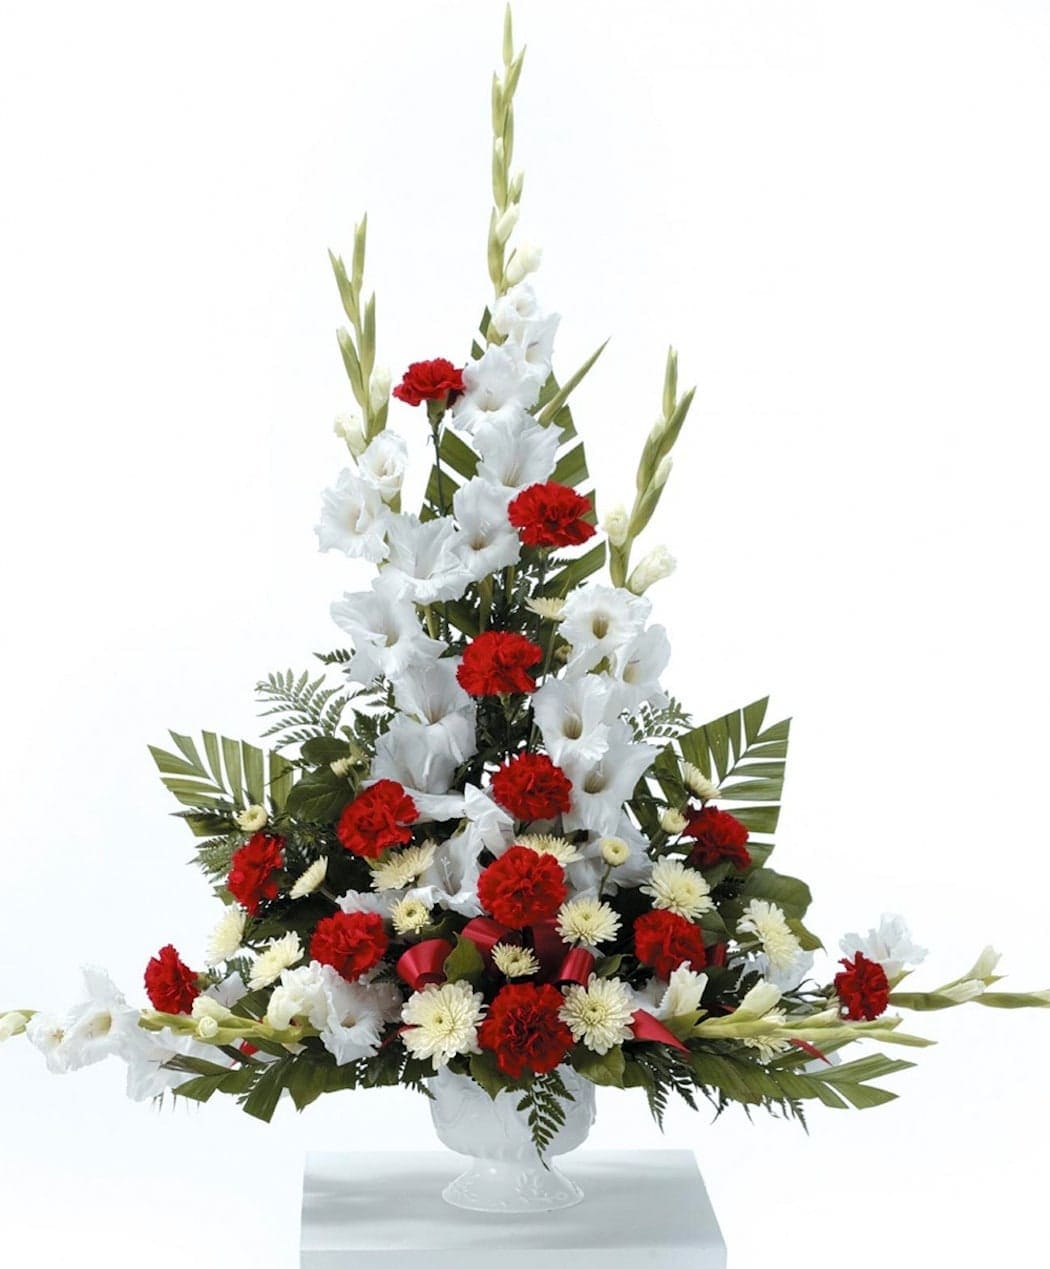 Gladiolus Grandeur - White Gladiolus Soar from a garden of red Carnations, white Cushion Pompons and select garden foliage in this memorable tribute.